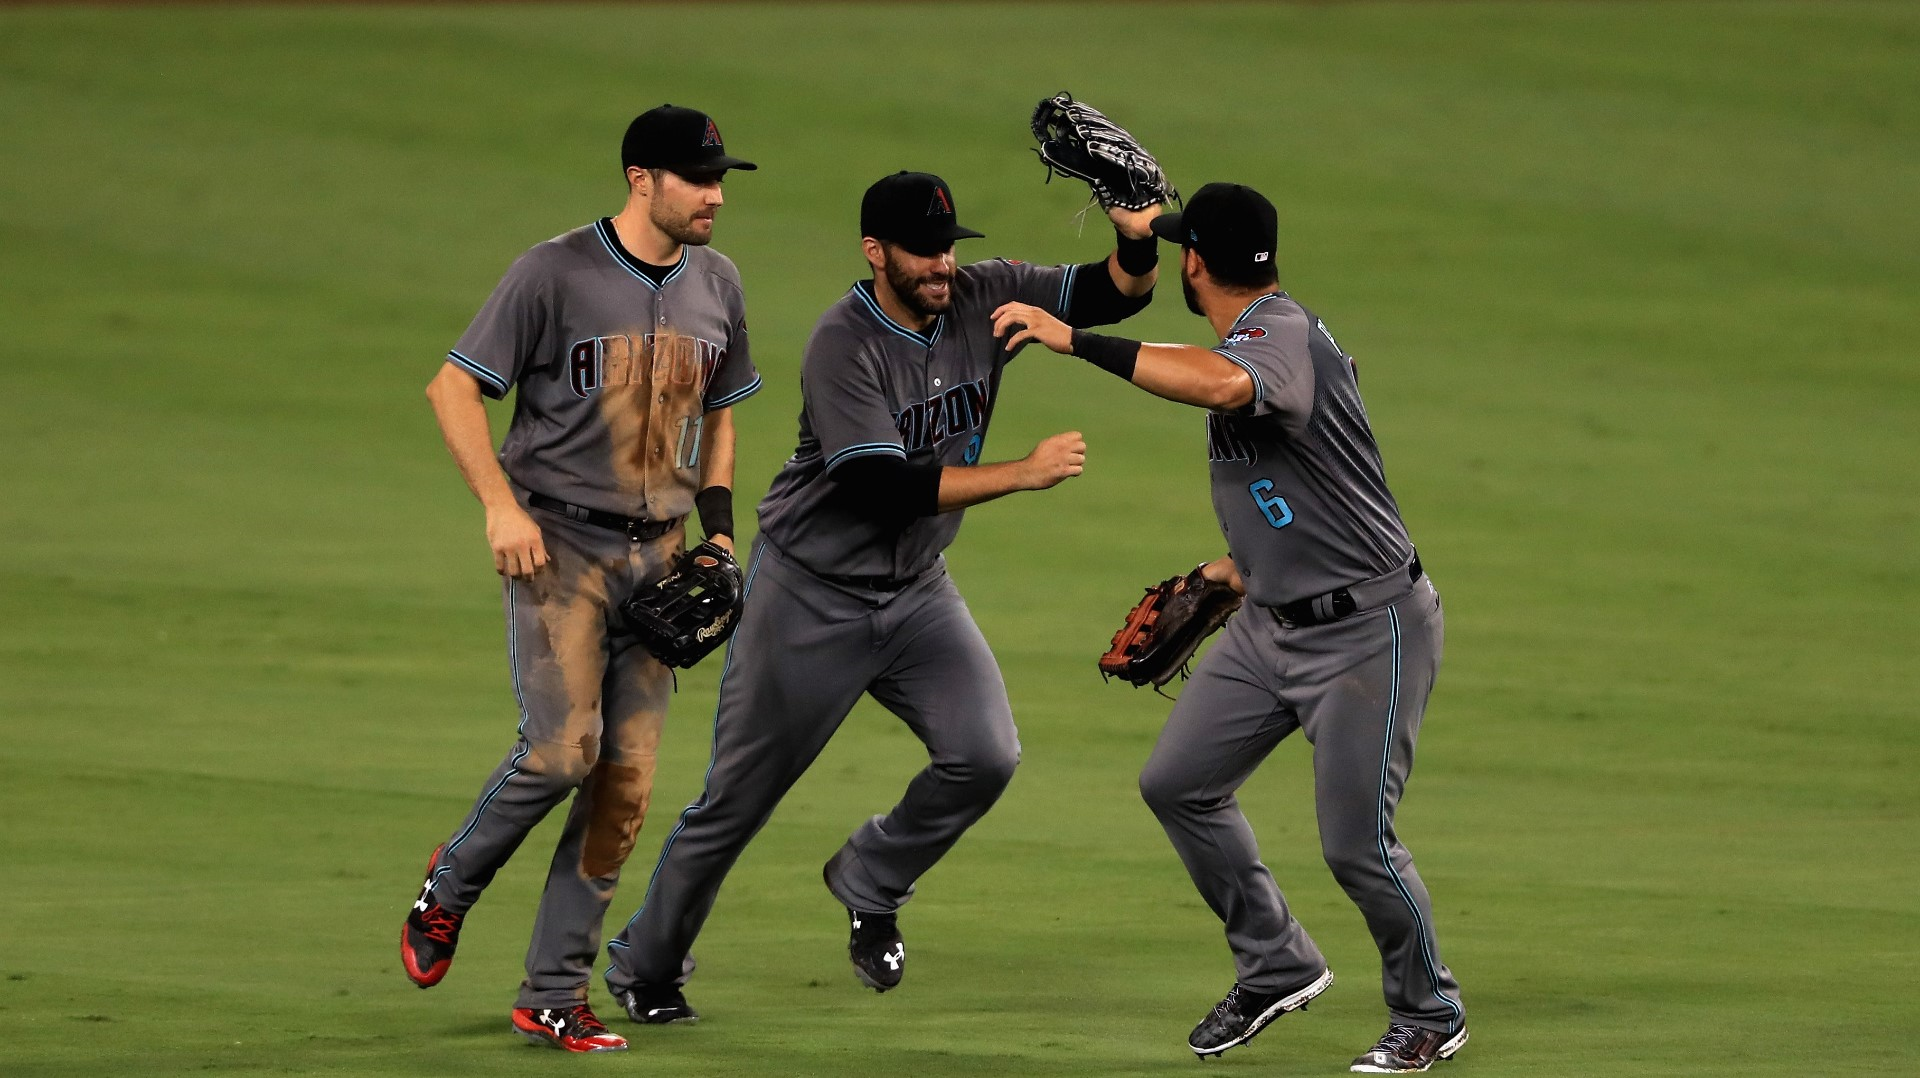 They're going streaking! 5 stats from the D-backs' incredible run